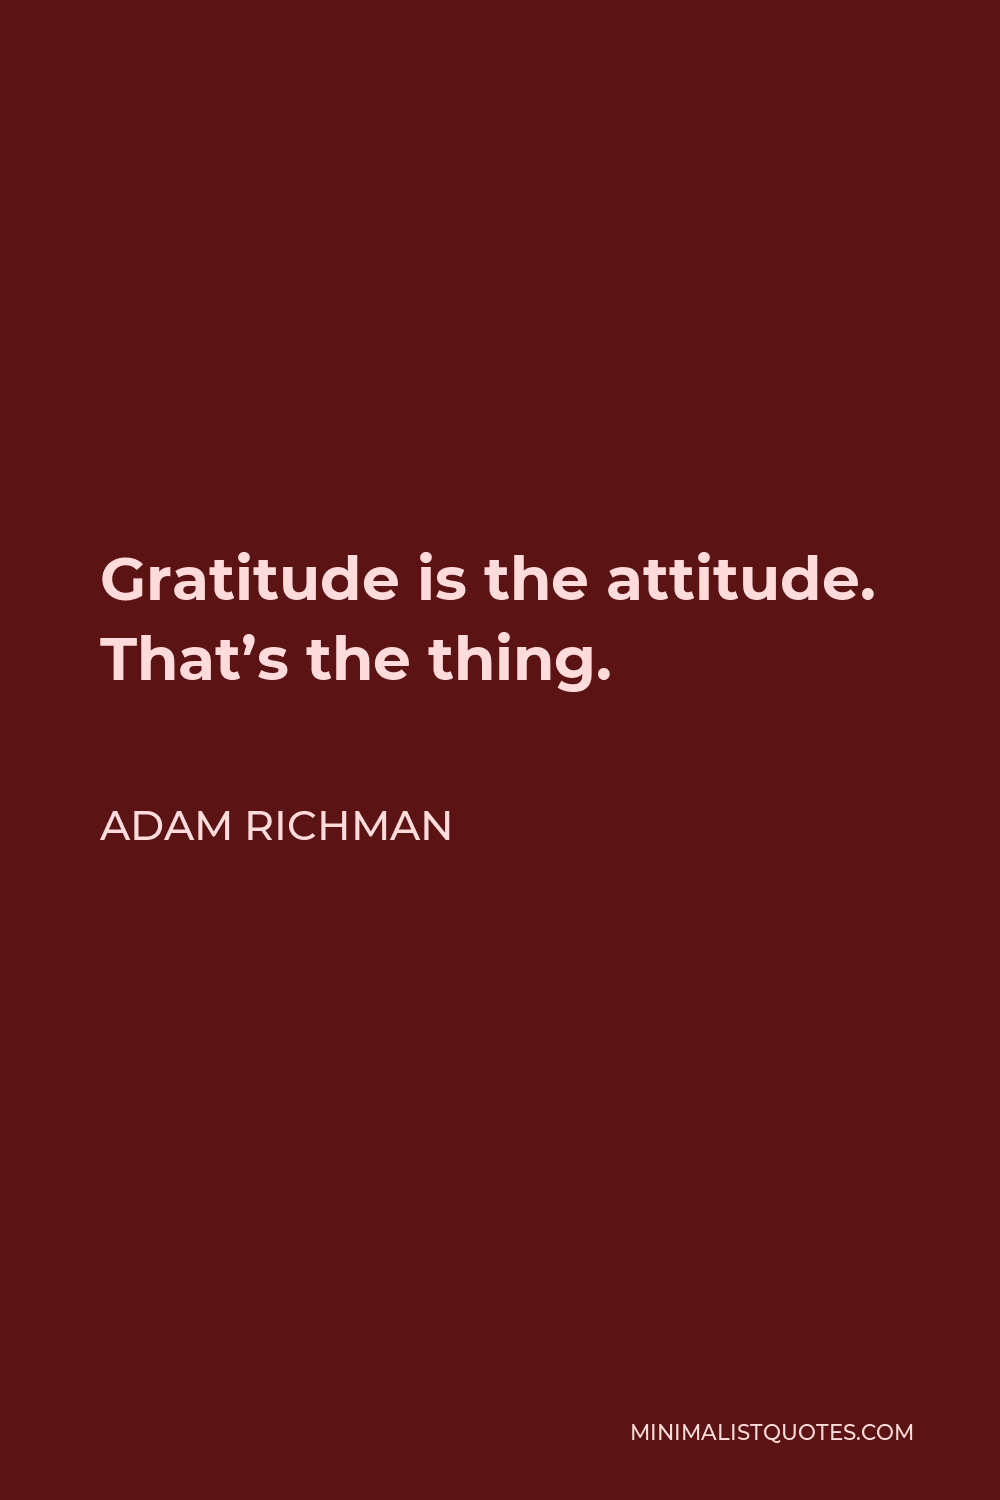 Adam Richman Quote - Gratitude is the attitude. That’s the thing.